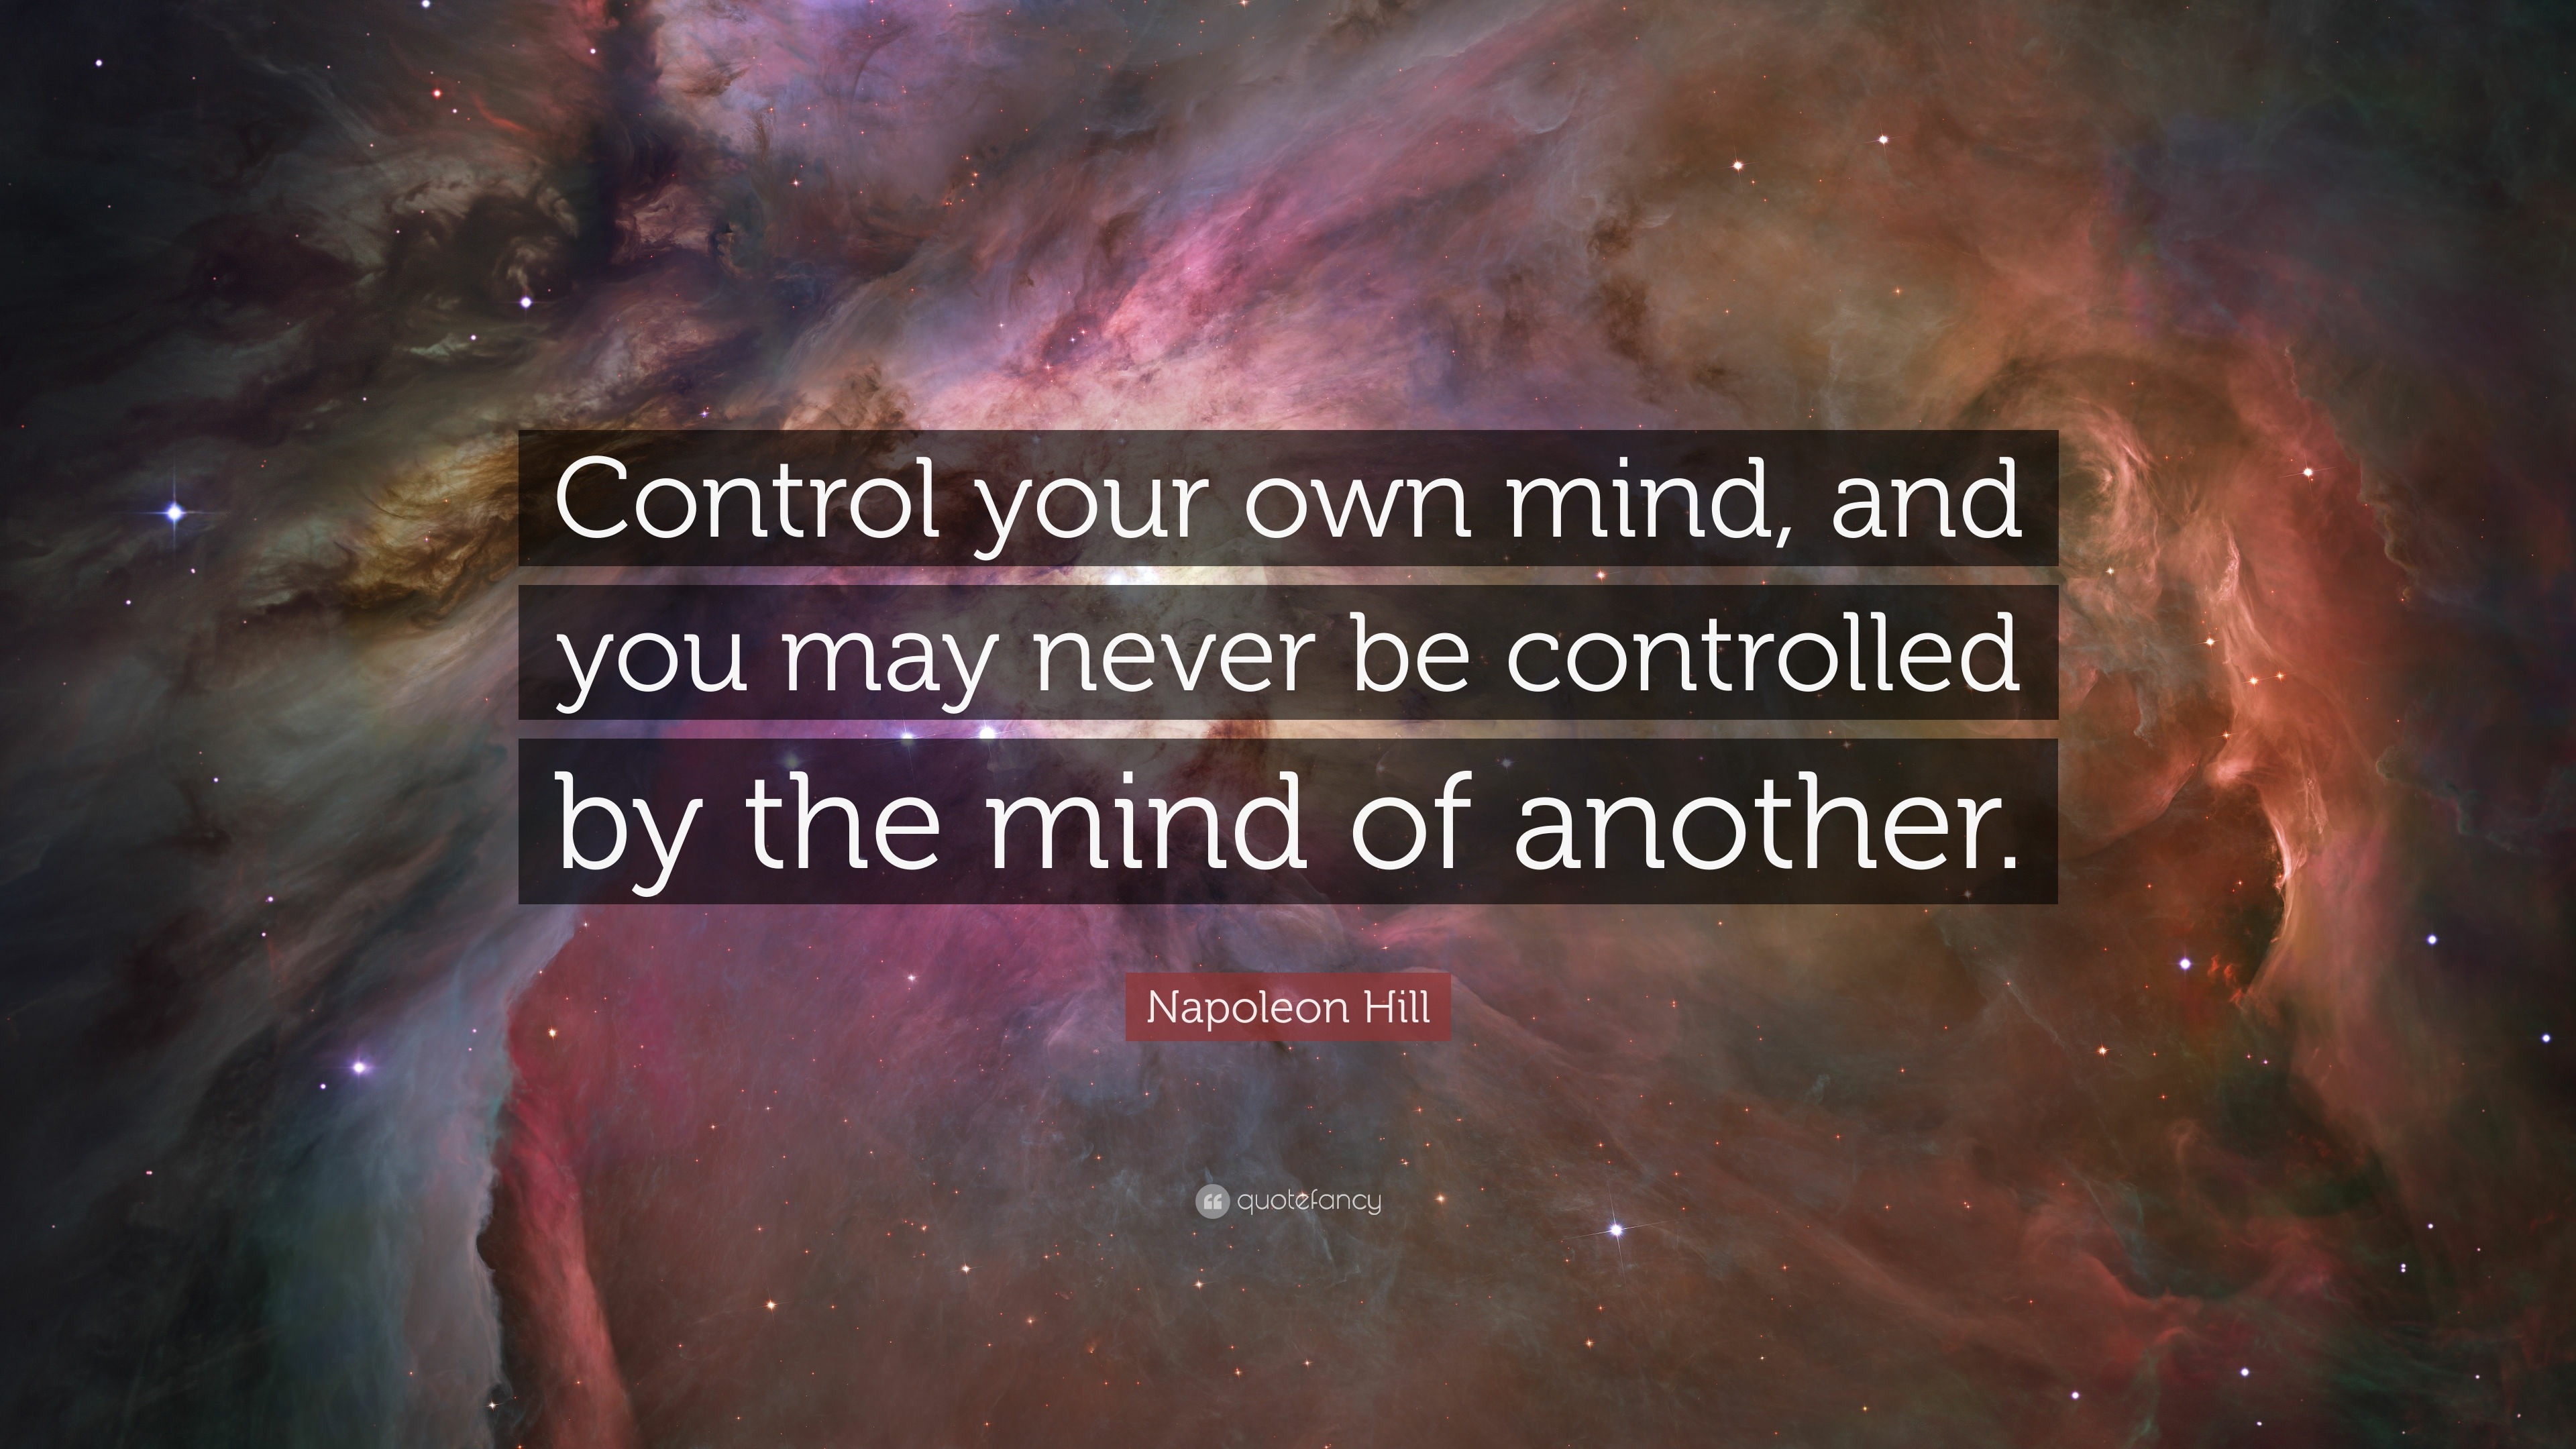 Napoleon Hill Quote: “Control your own mind, and you may never be ...